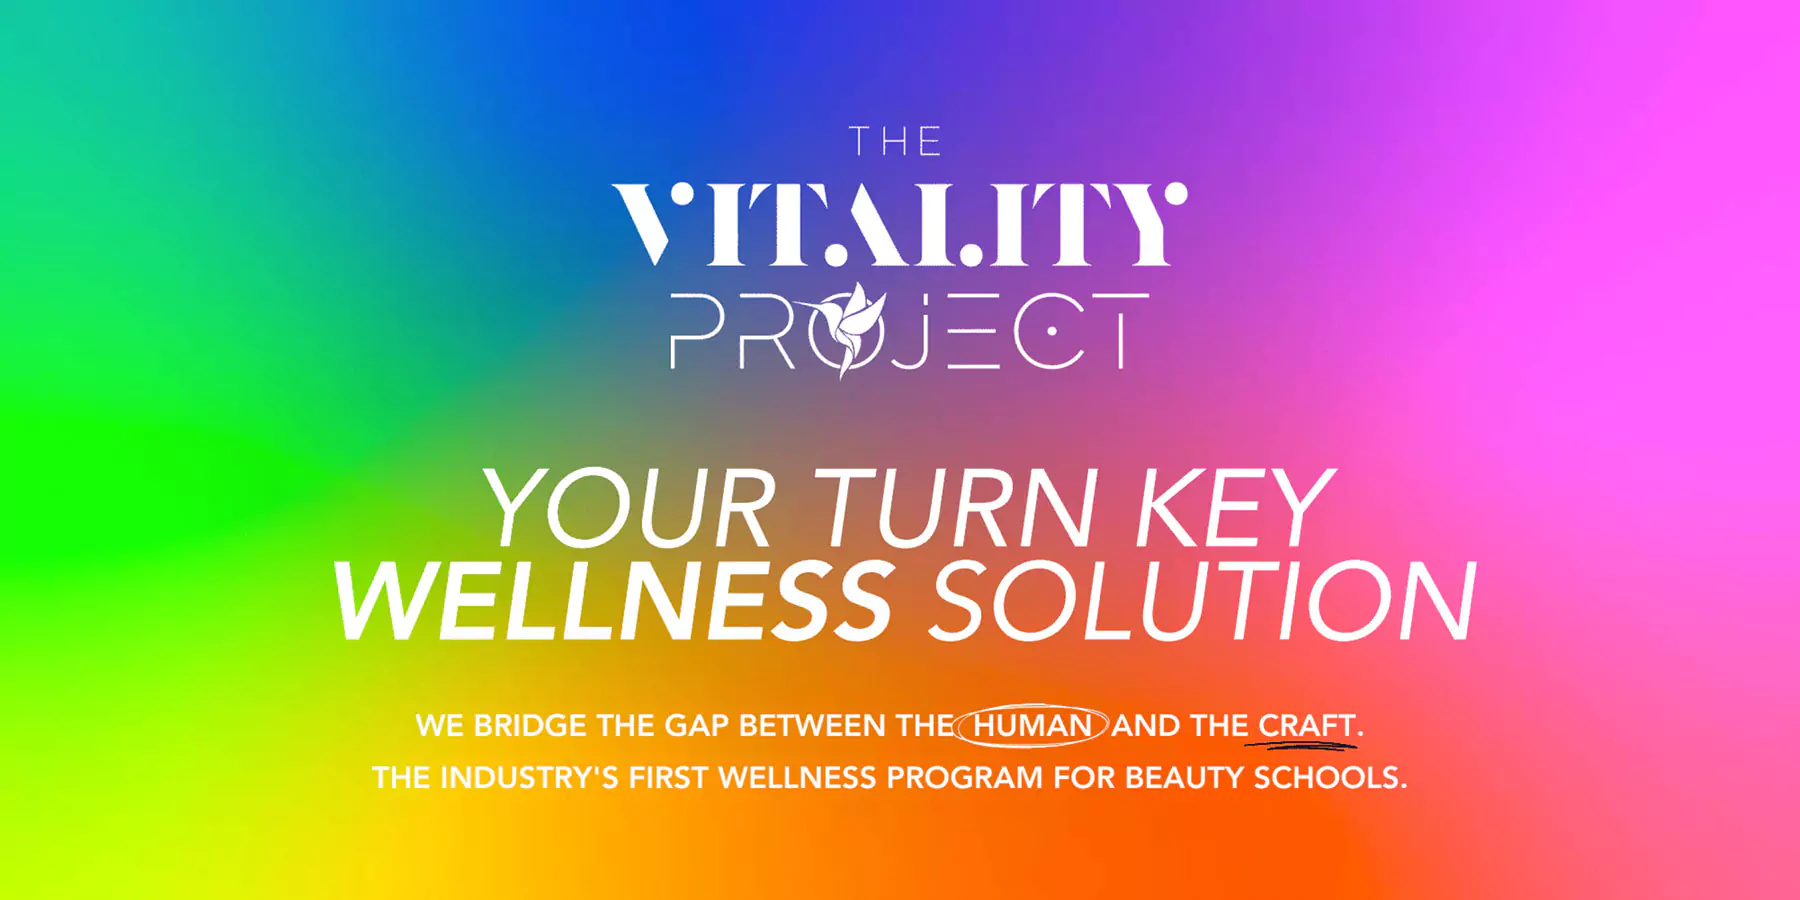 Introducing The Vitality Project